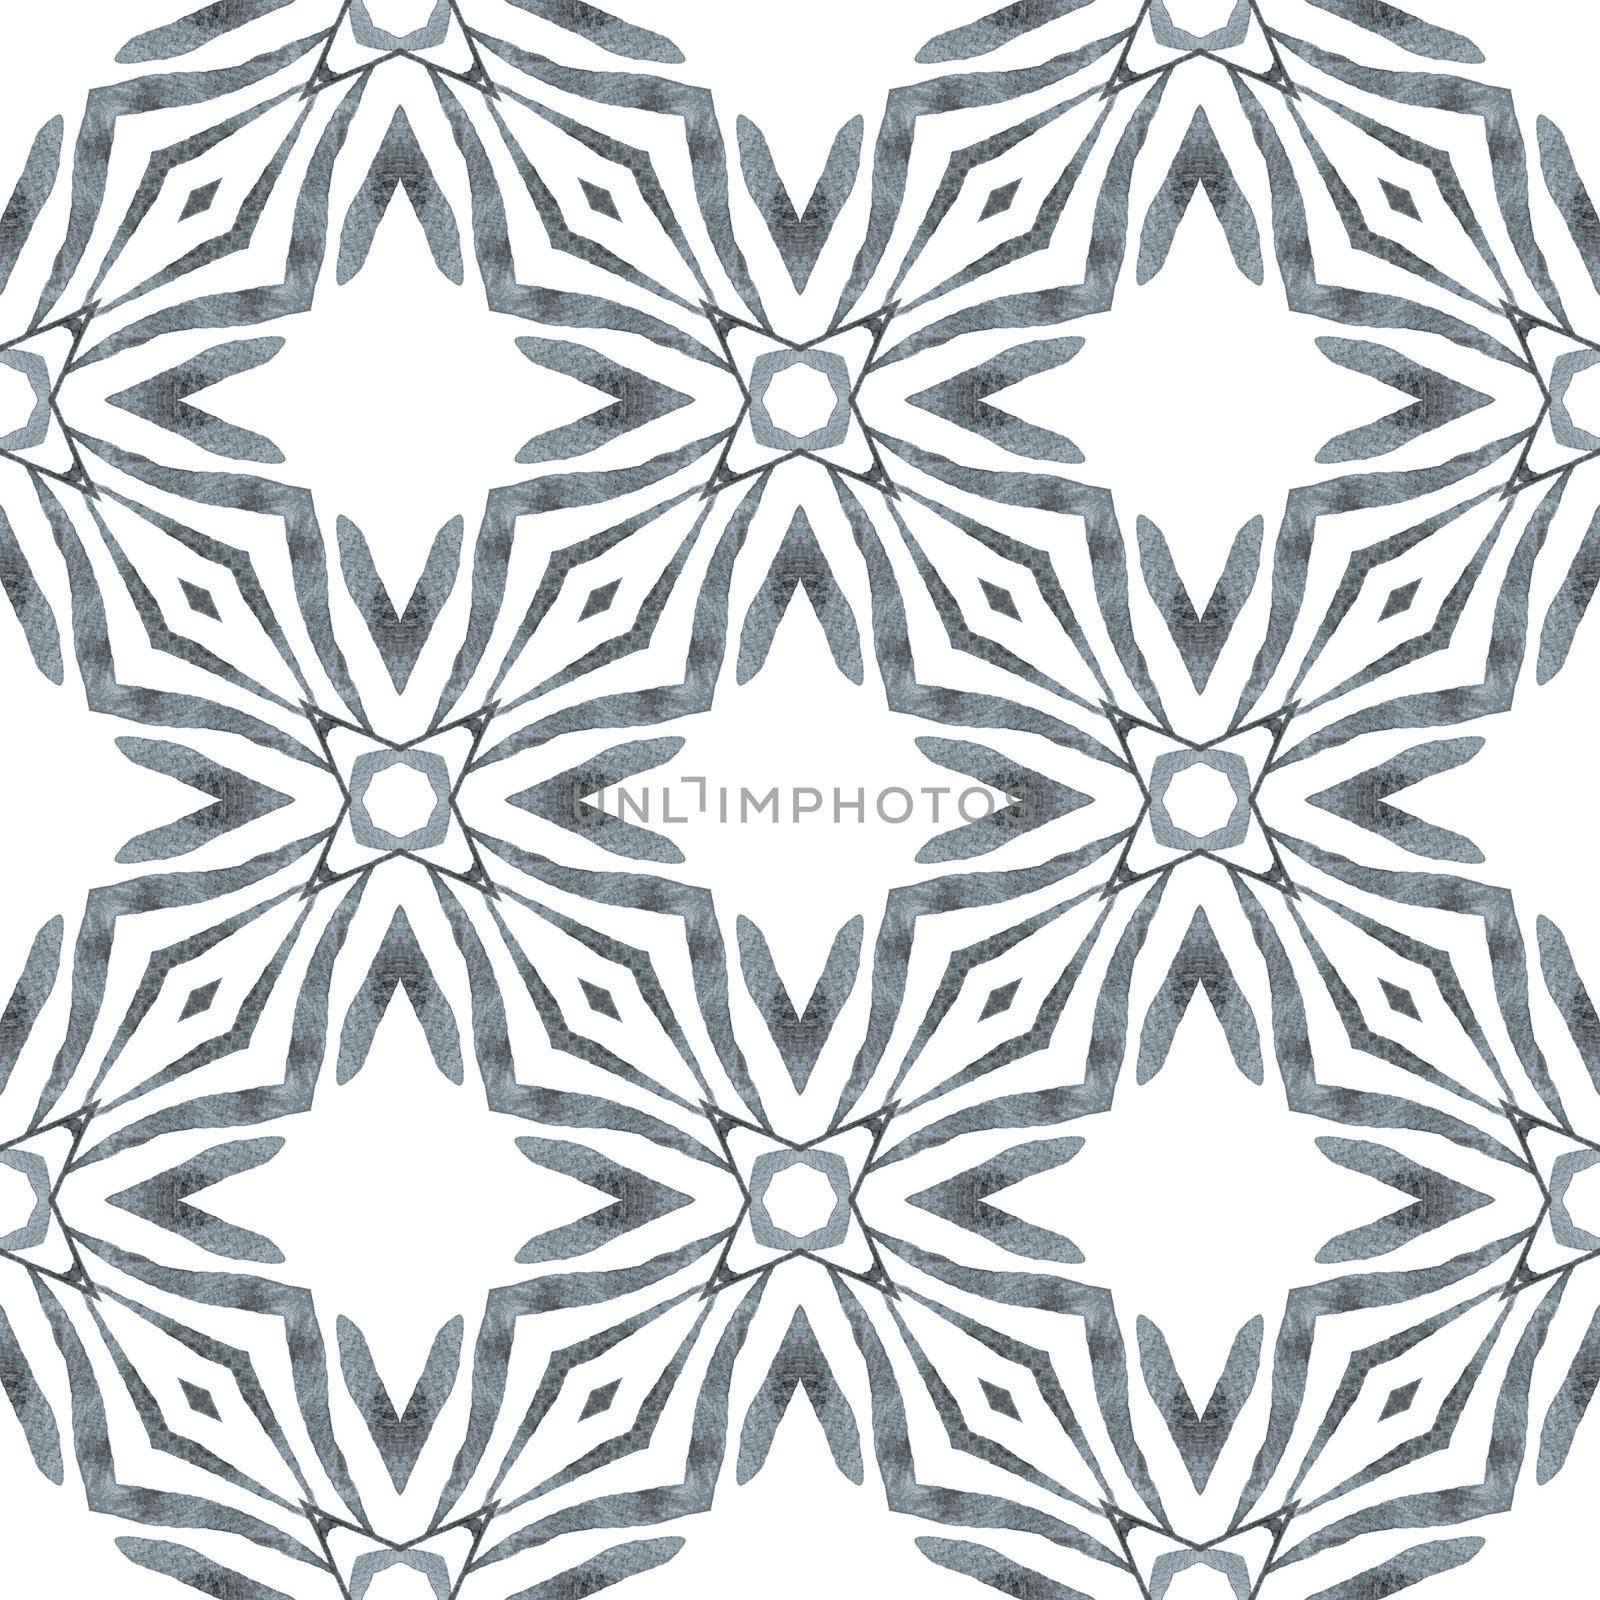 Watercolor medallion seamless border. Black and white comely boho chic summer design. Medallion seamless pattern. Textile ready terrific print, swimwear fabric, wallpaper, wrapping.